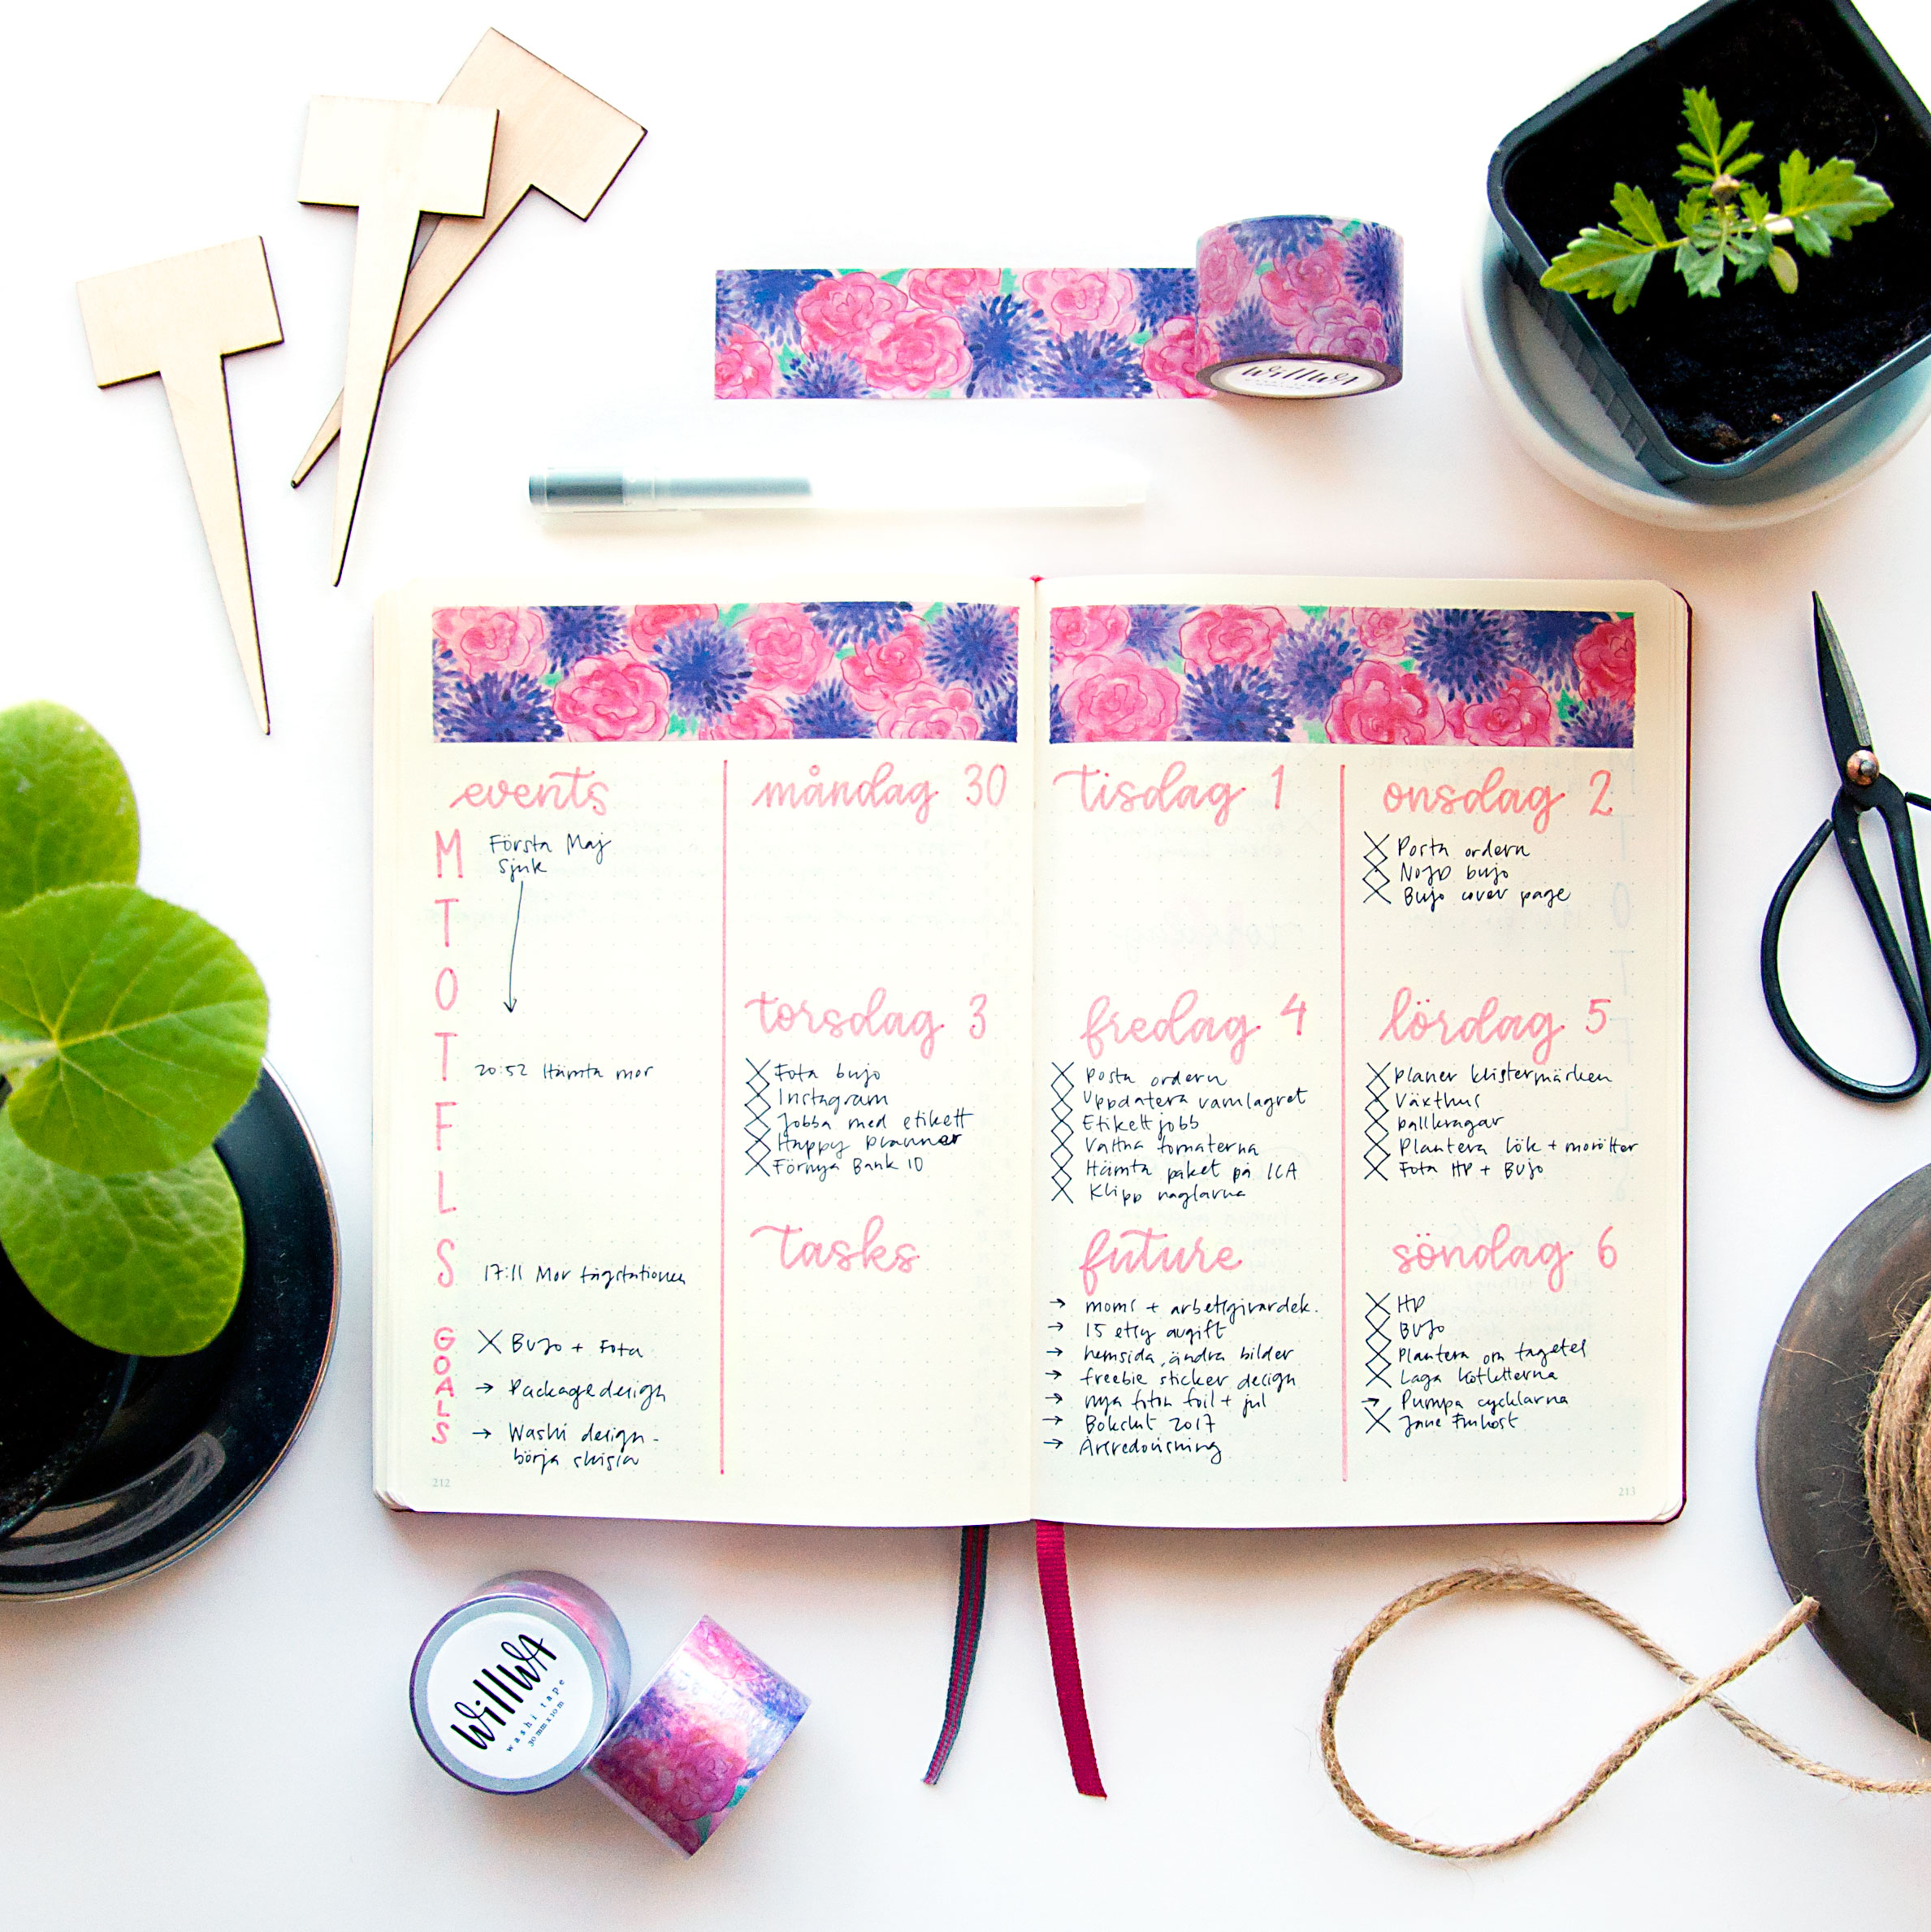 Ocean of Flowers Washi Tape - Design by Willwa